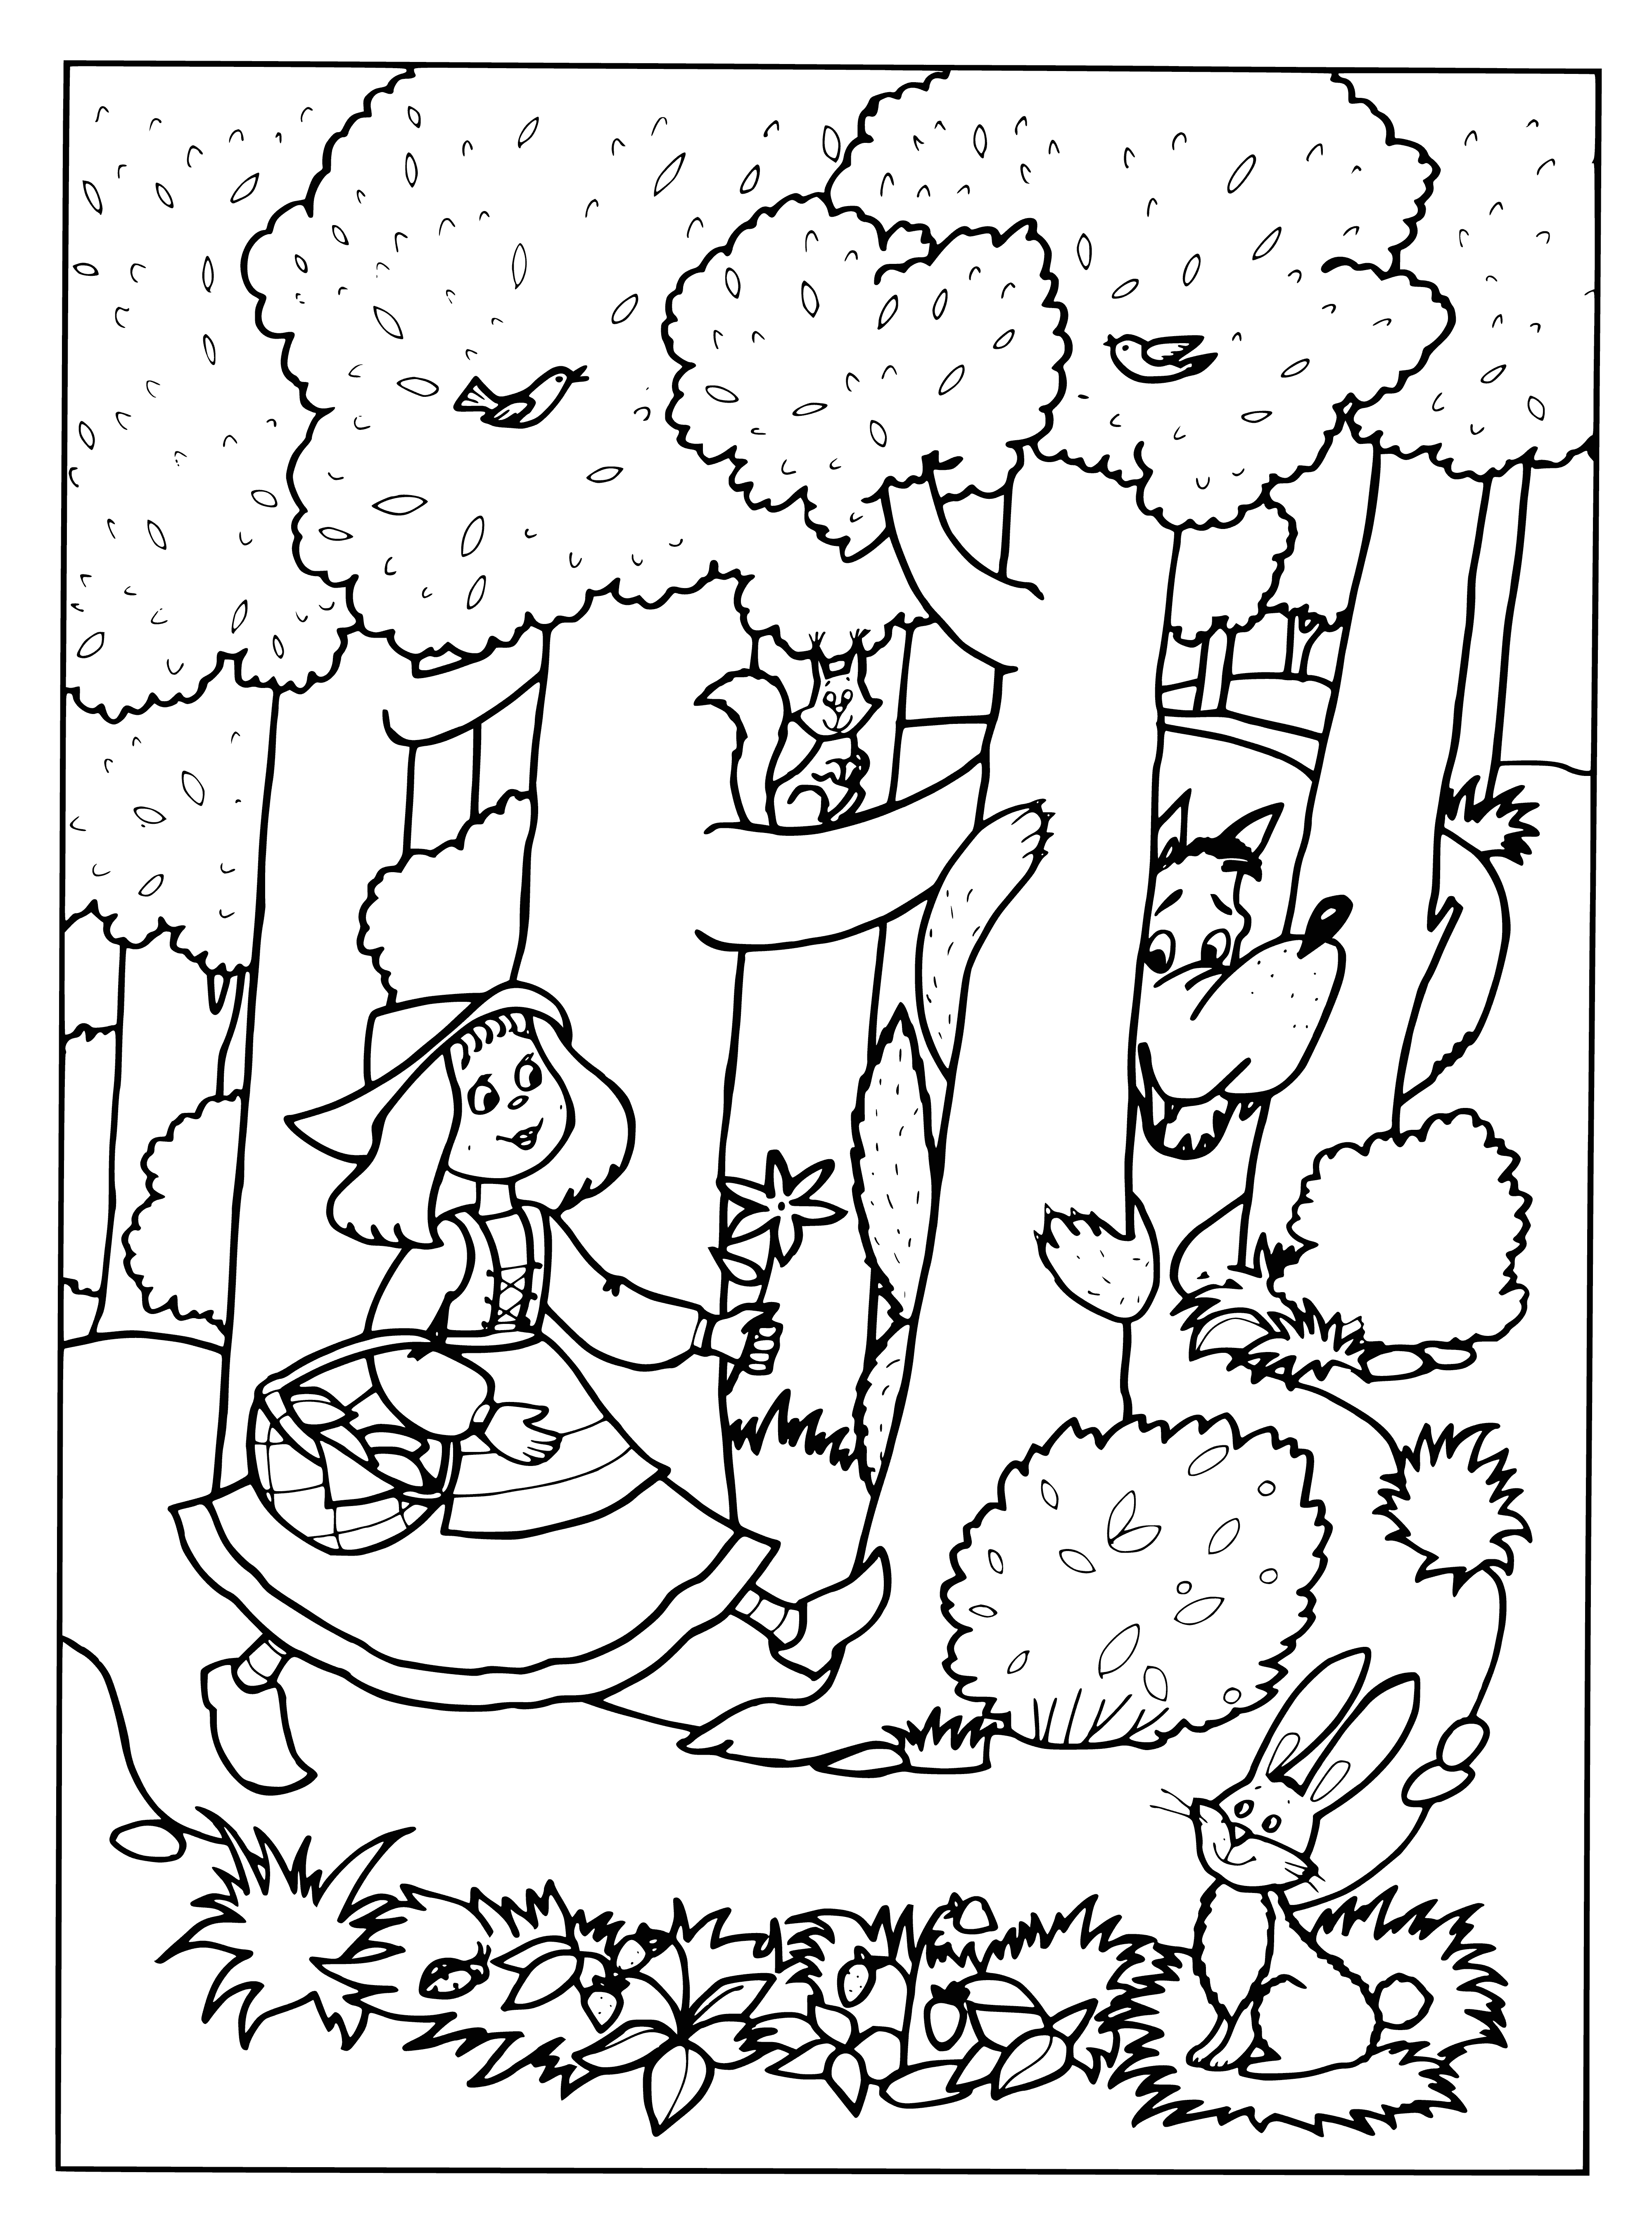 coloring page: Little girl in red riding hood goes through woods, carrying food basket and sees wolf looking at her.